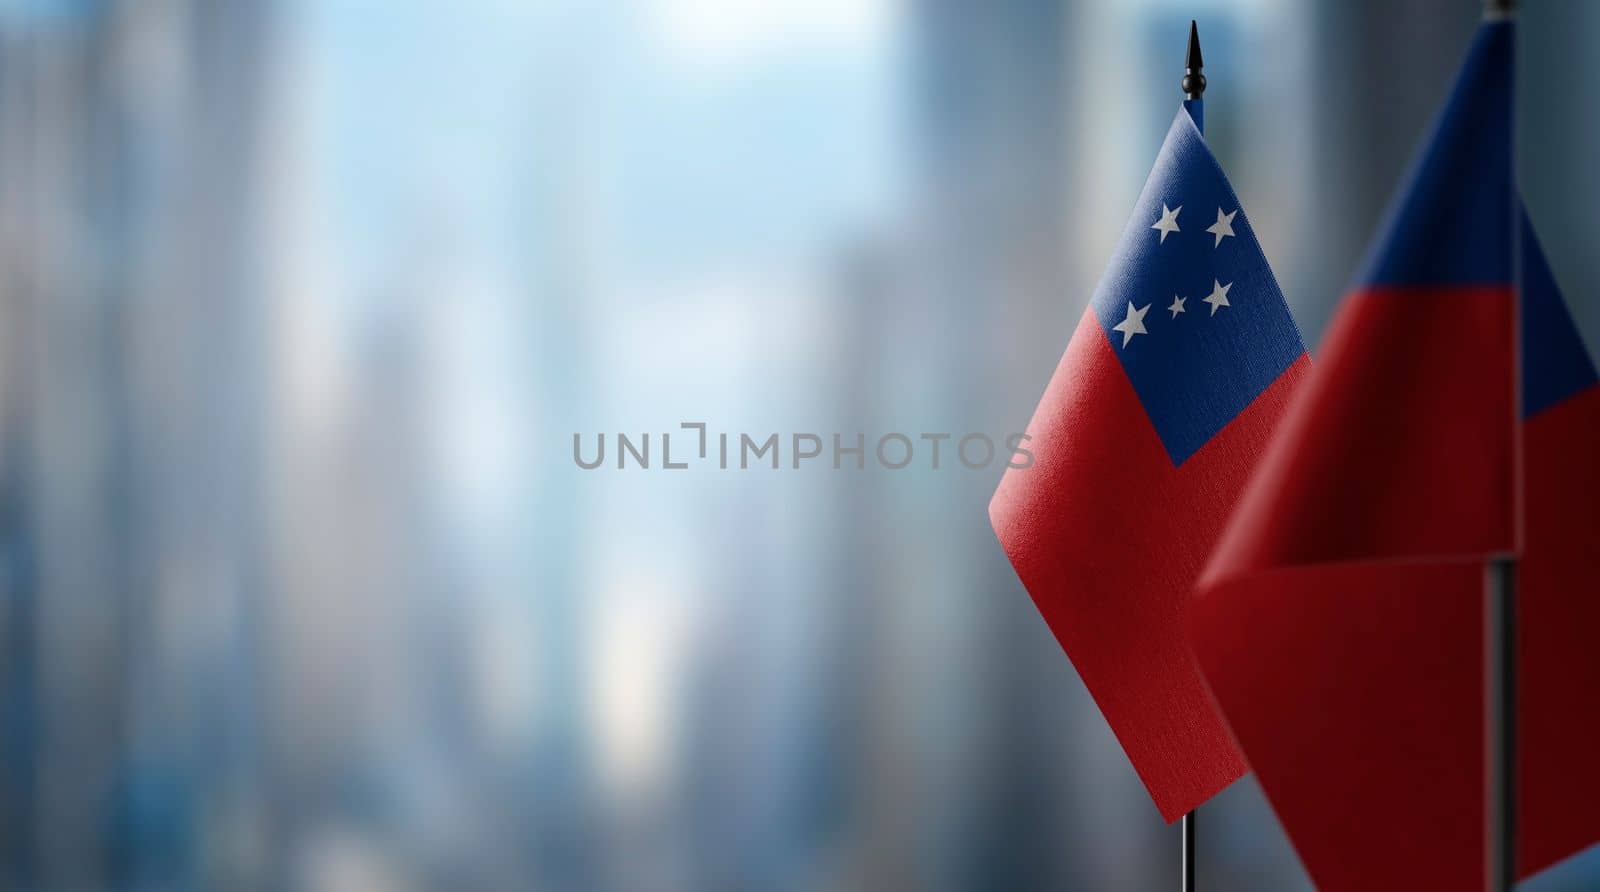 Small flags of the Samoa on an abstract blurry background.